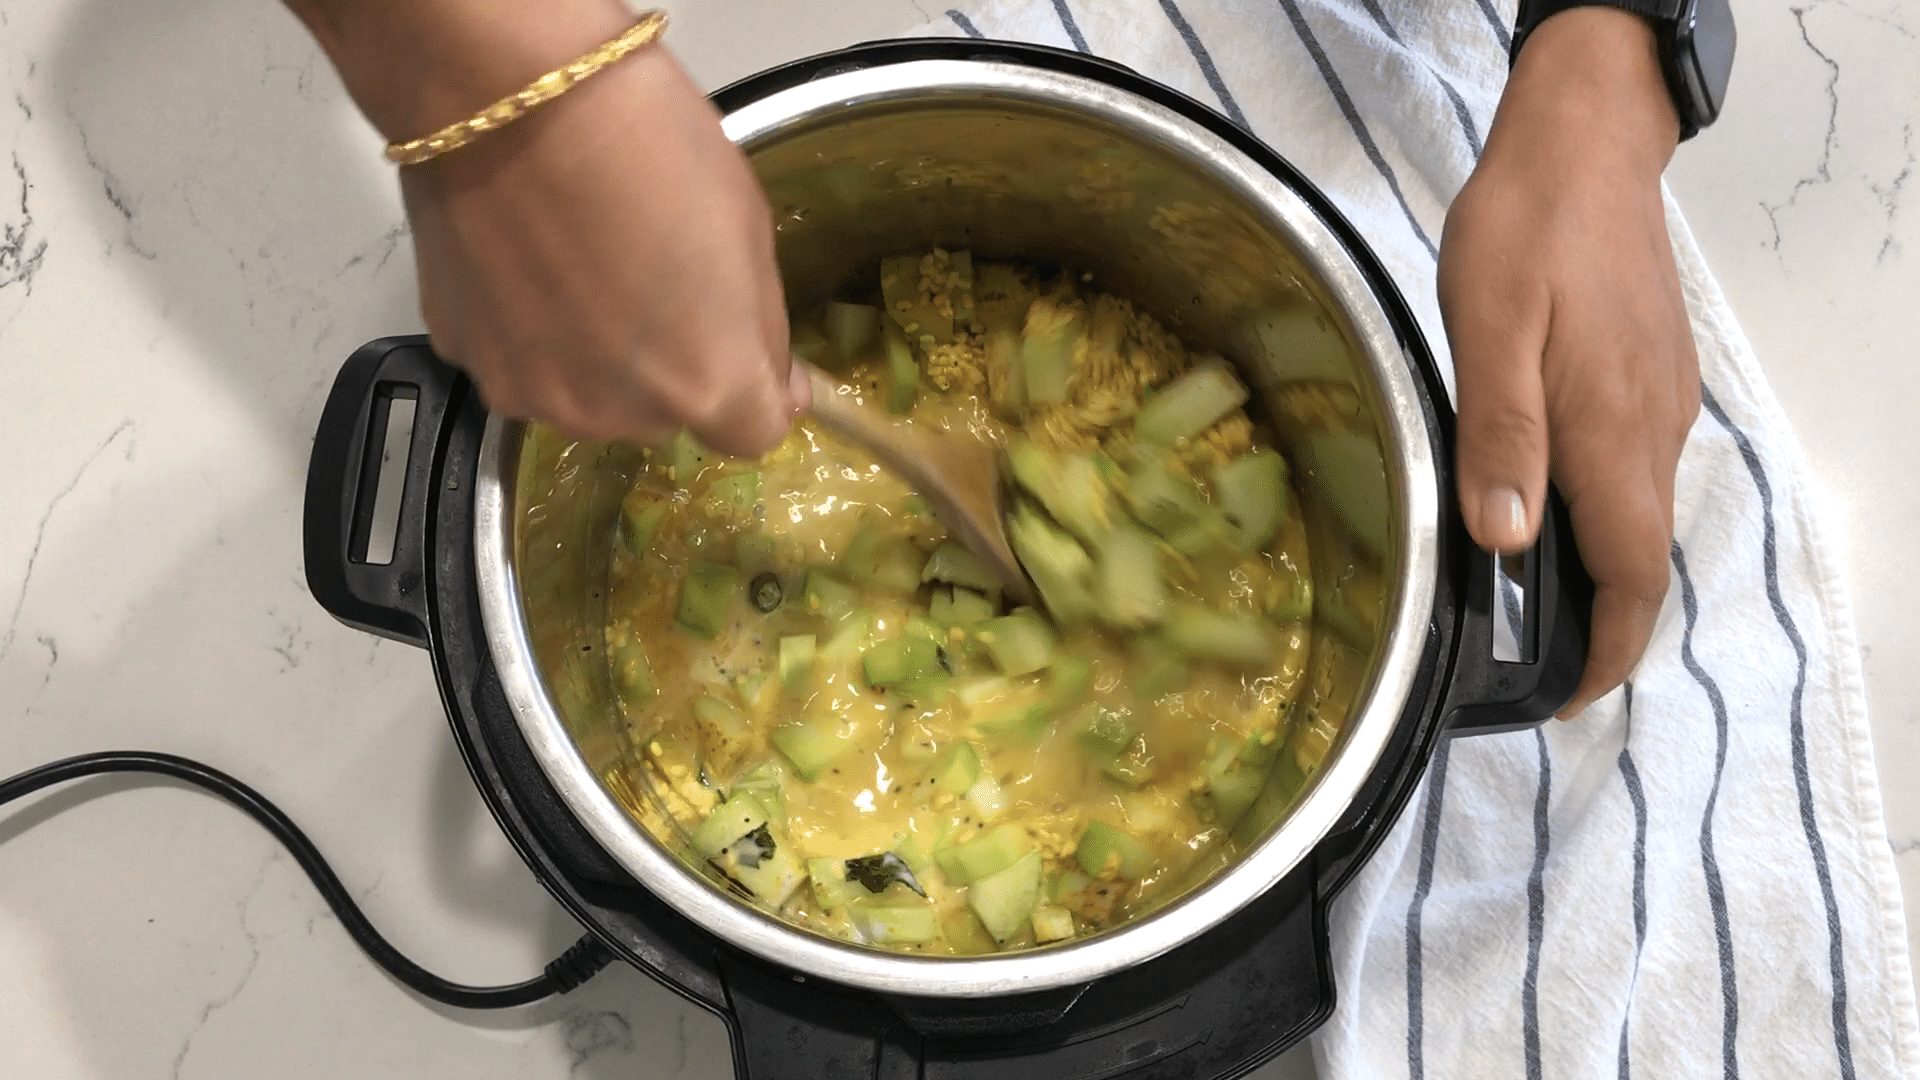 A person cooking food on a stove, with Chayote and Lentil